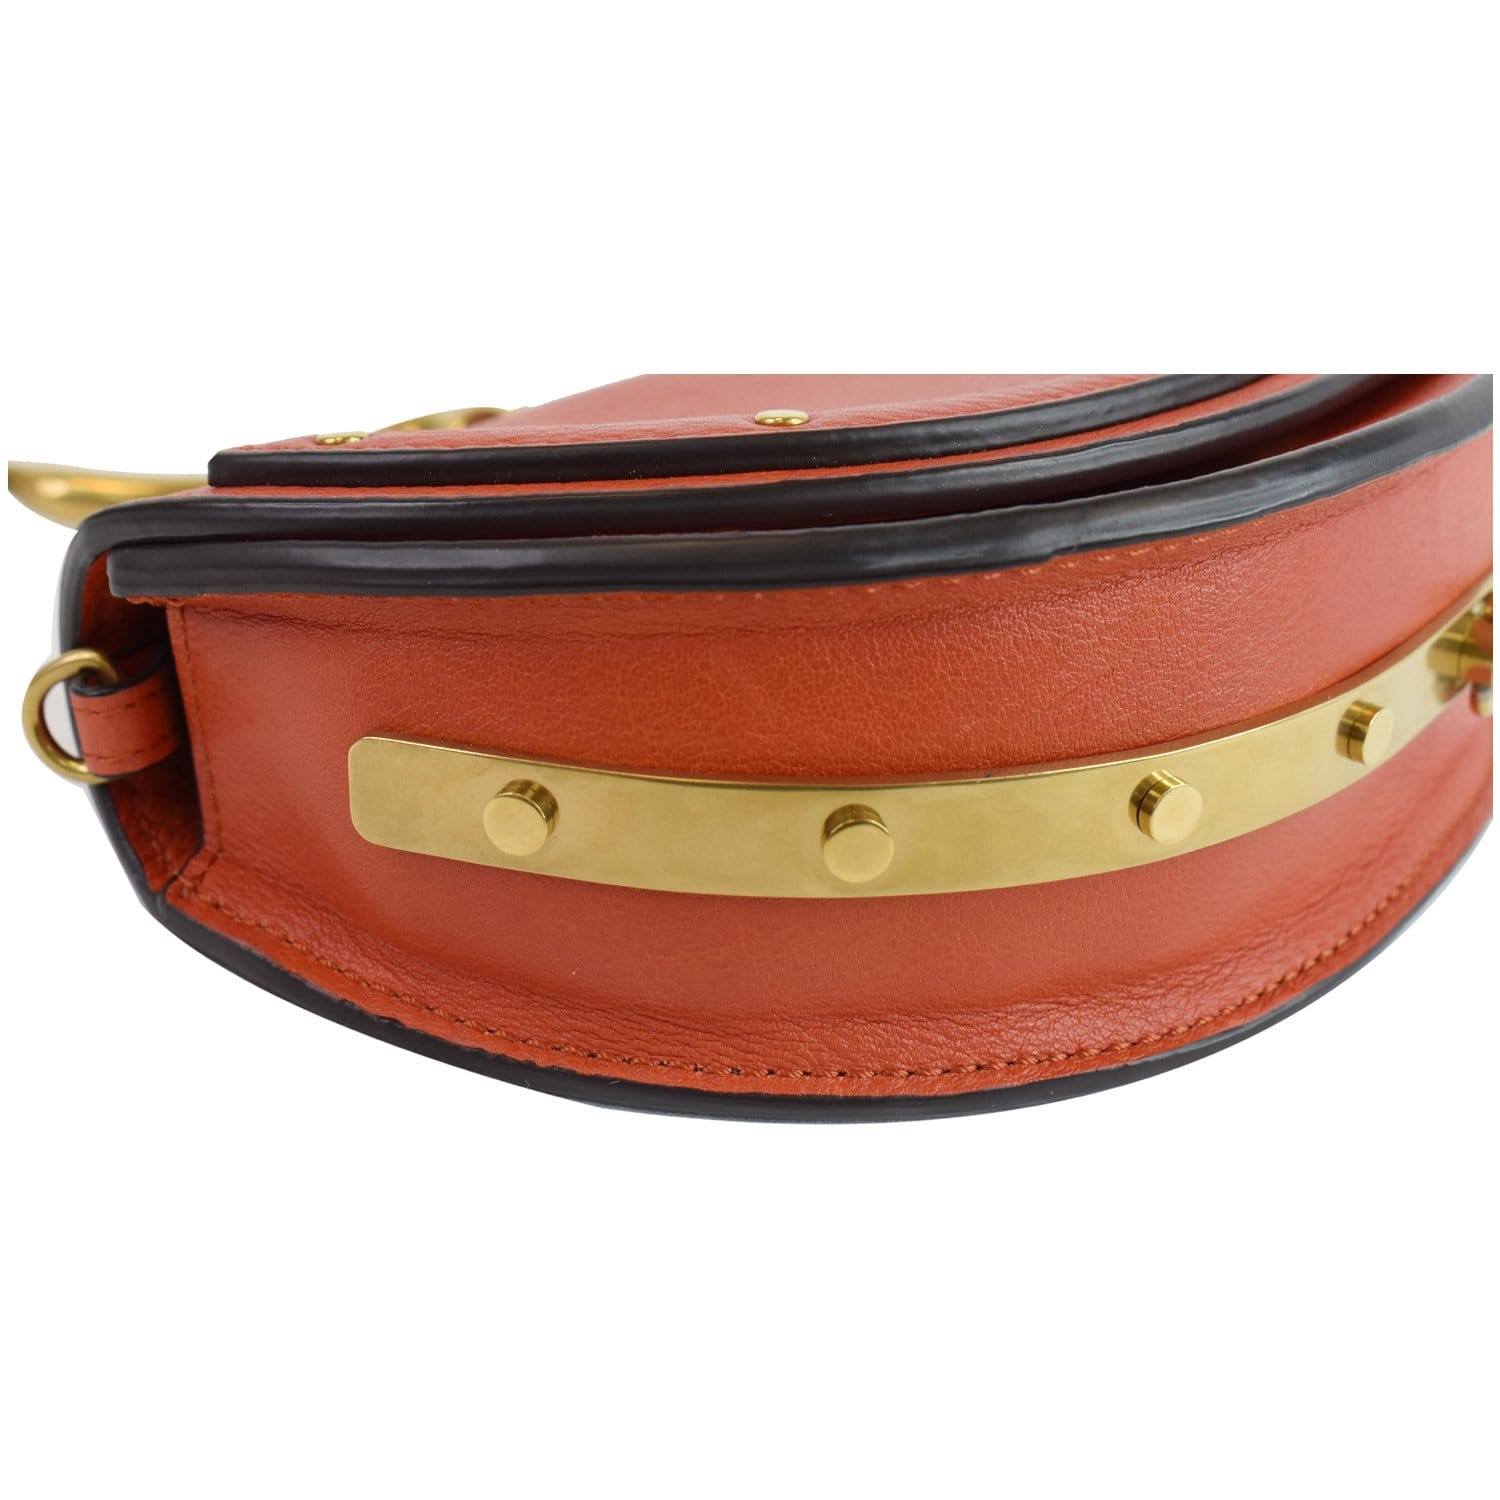 This Chloé Small Nile Bracelet Calfskin Minaudiere had some